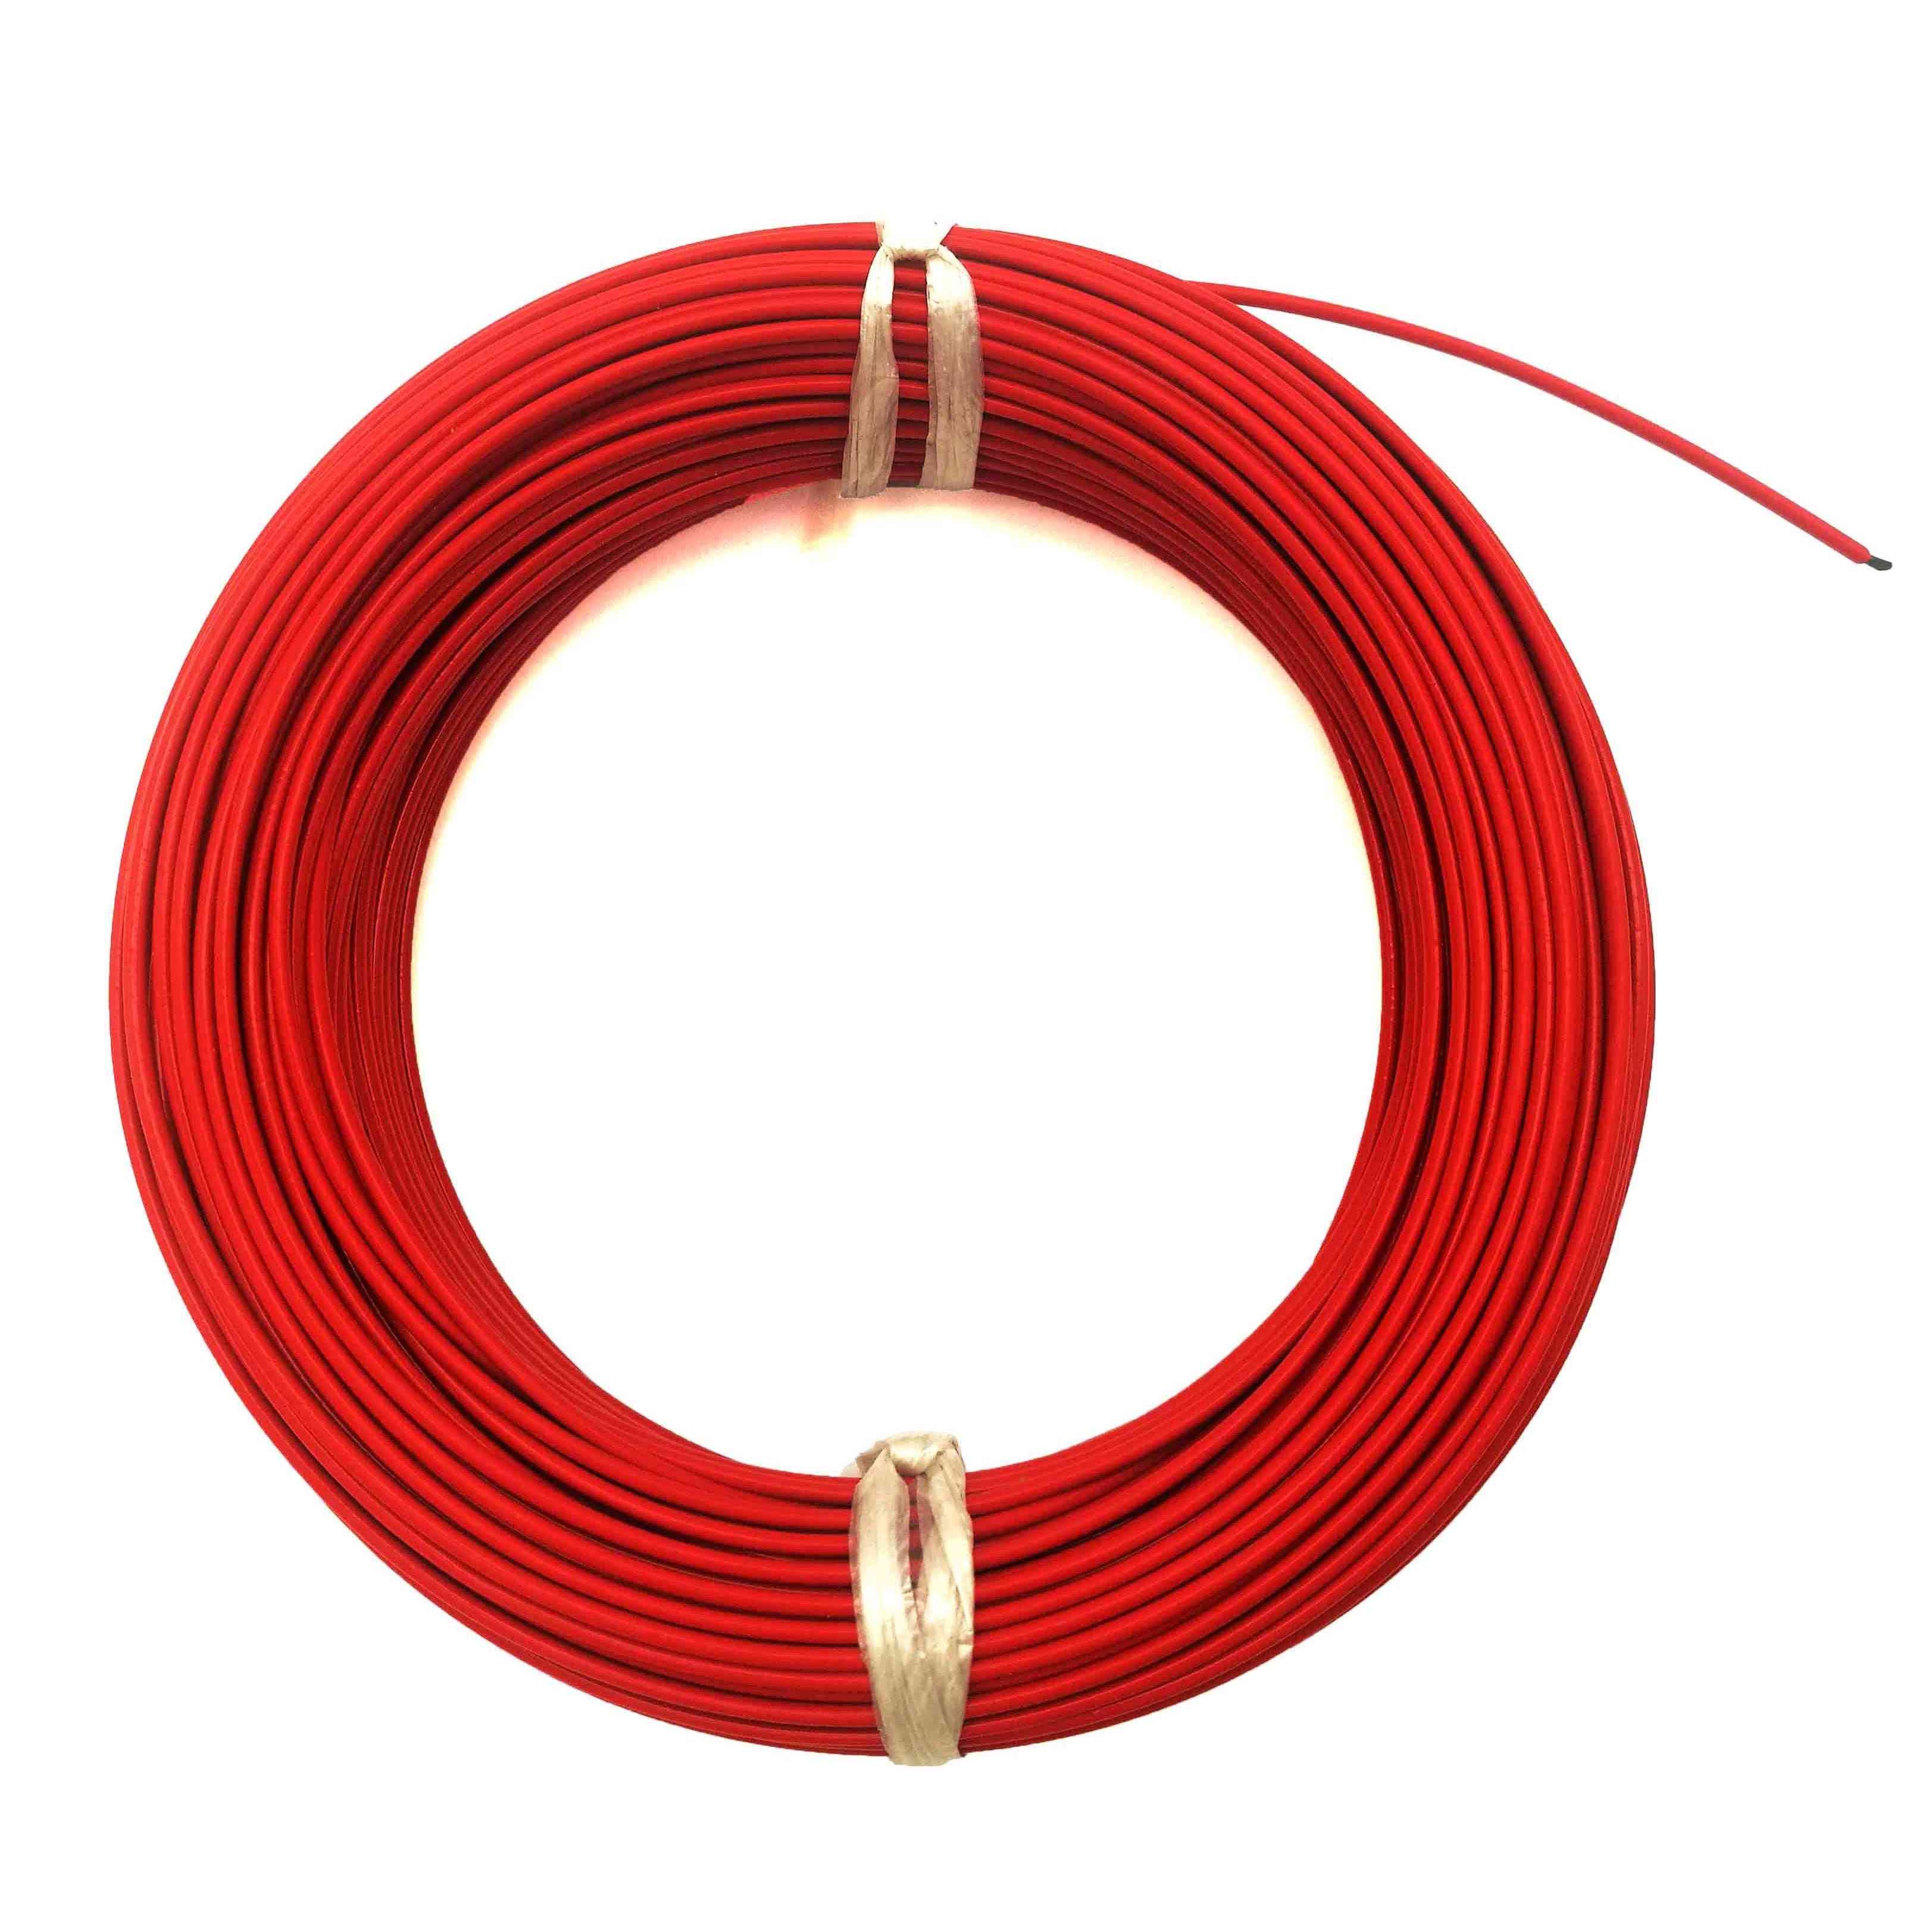 10m/15m-33ohm,12k Fluoroplastic Electric Heating Cable